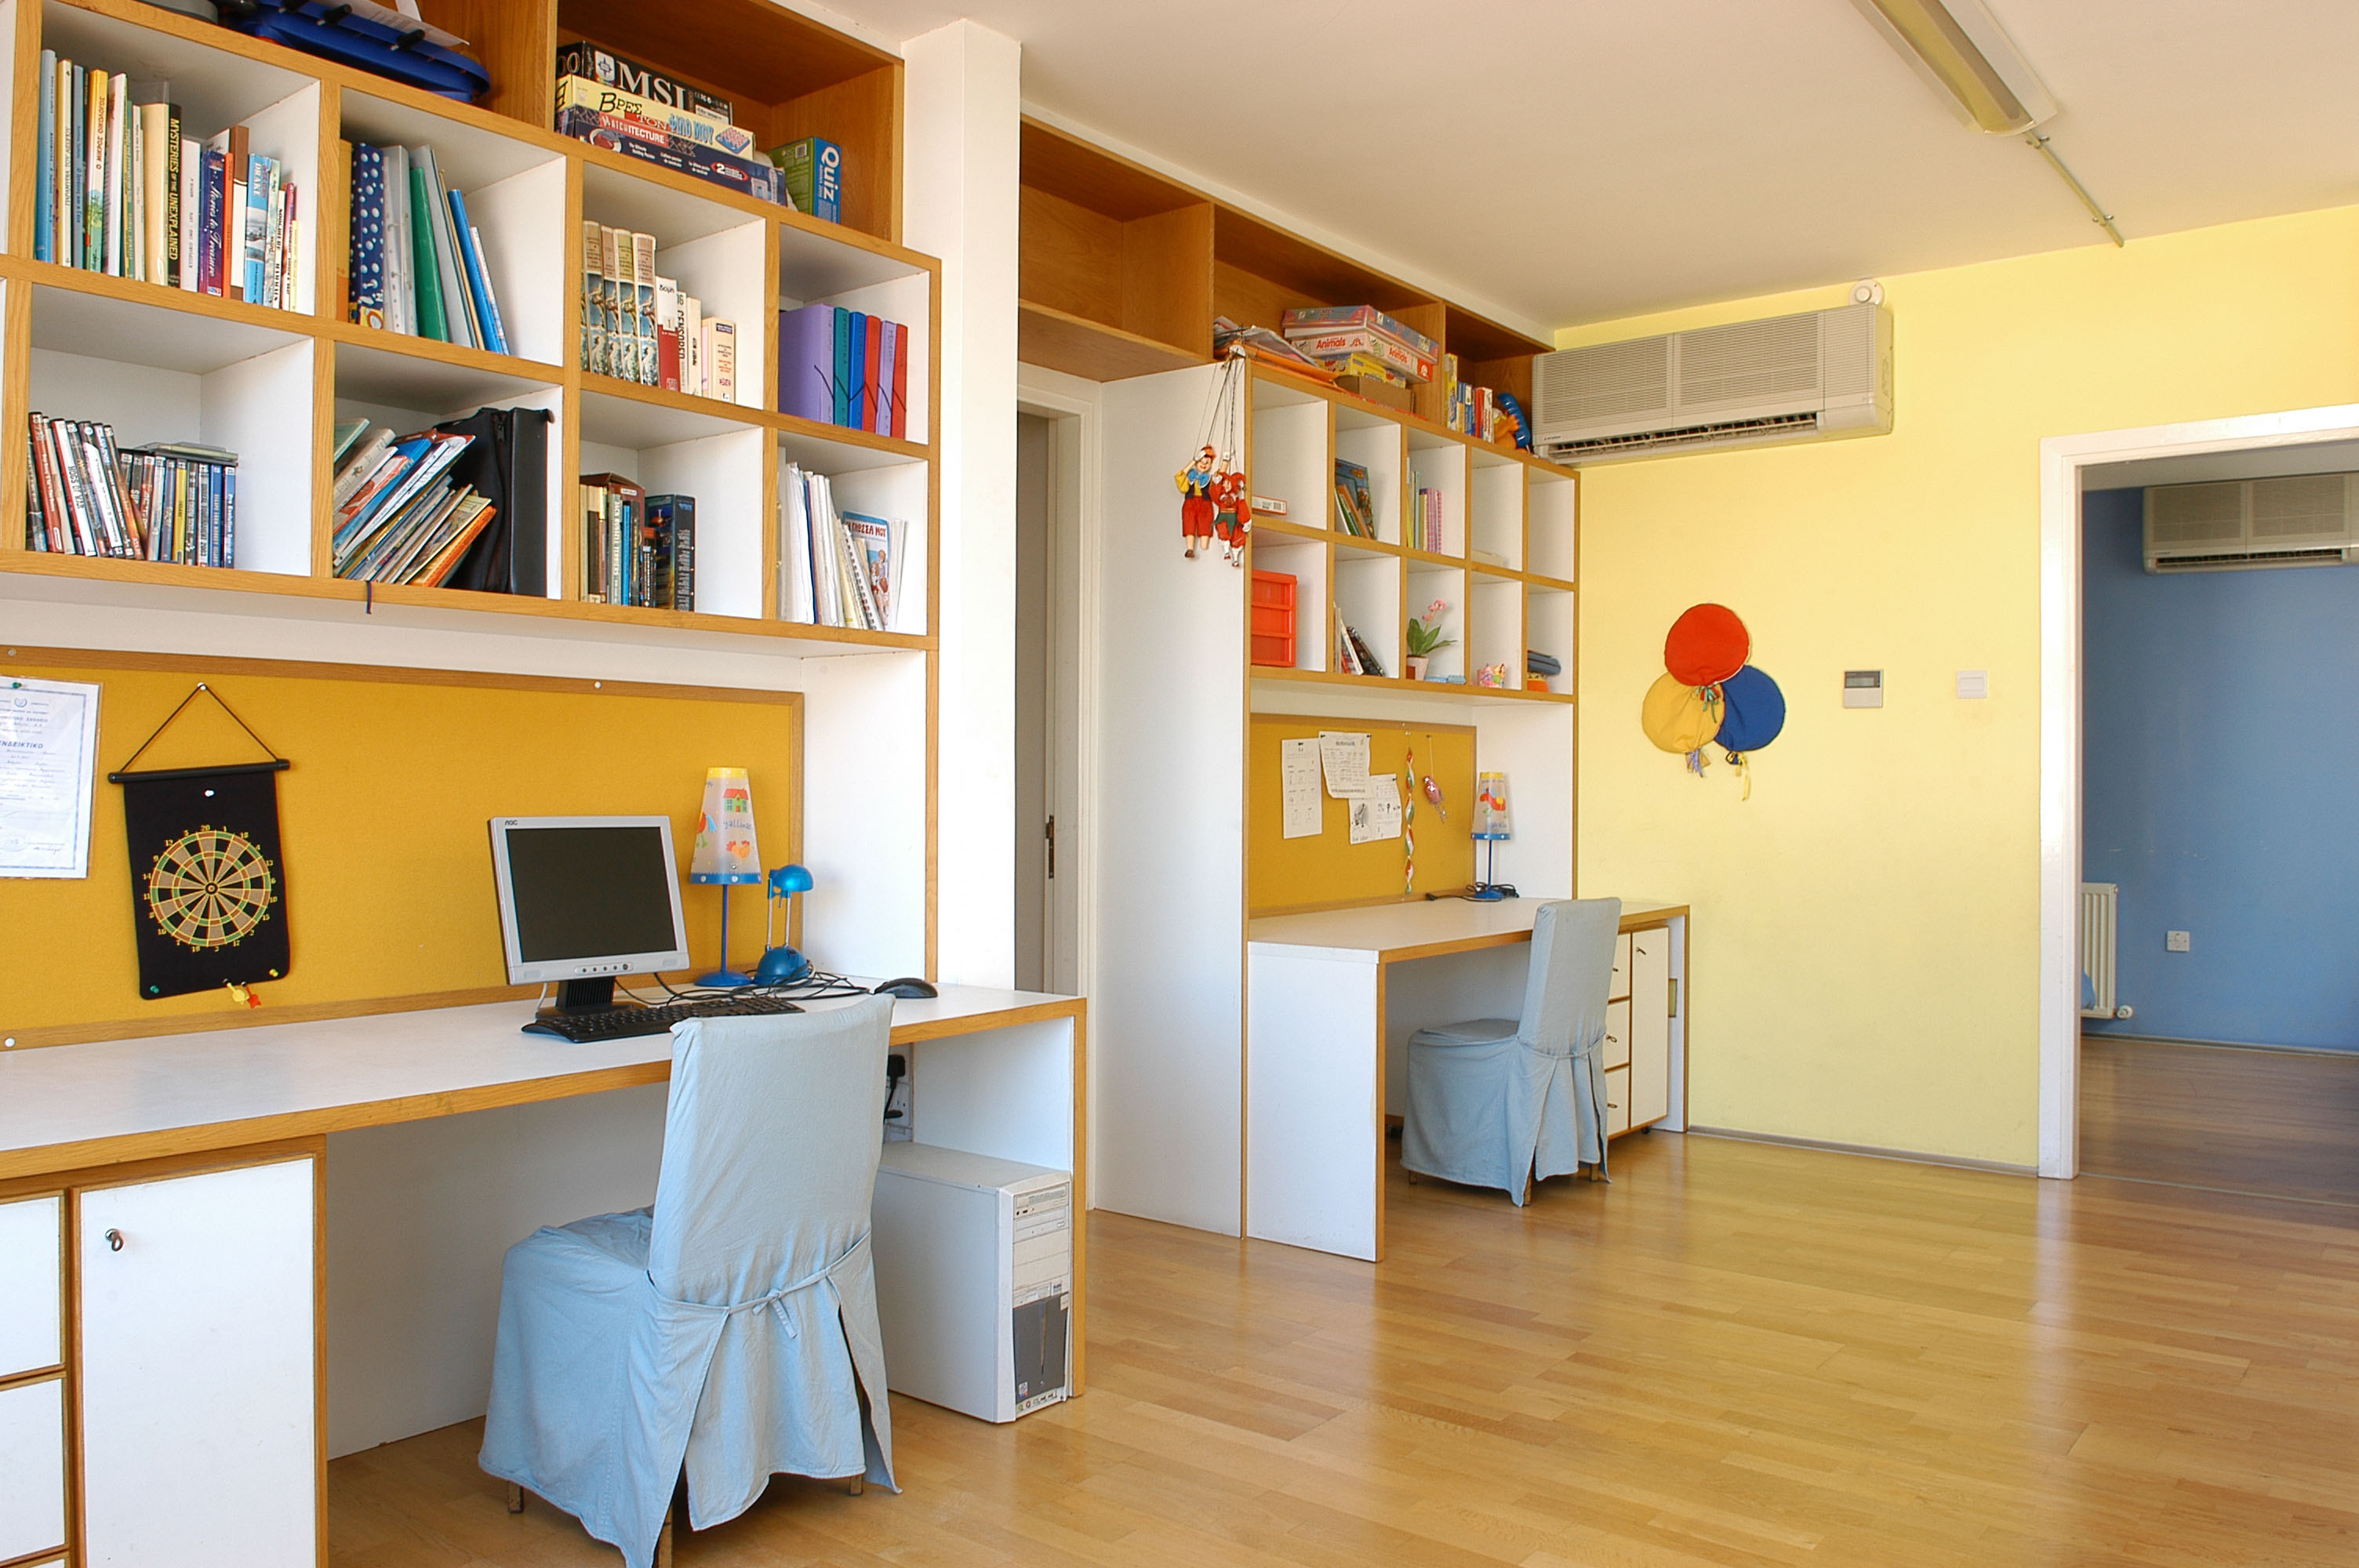 A live-work space - Kids' study and play room